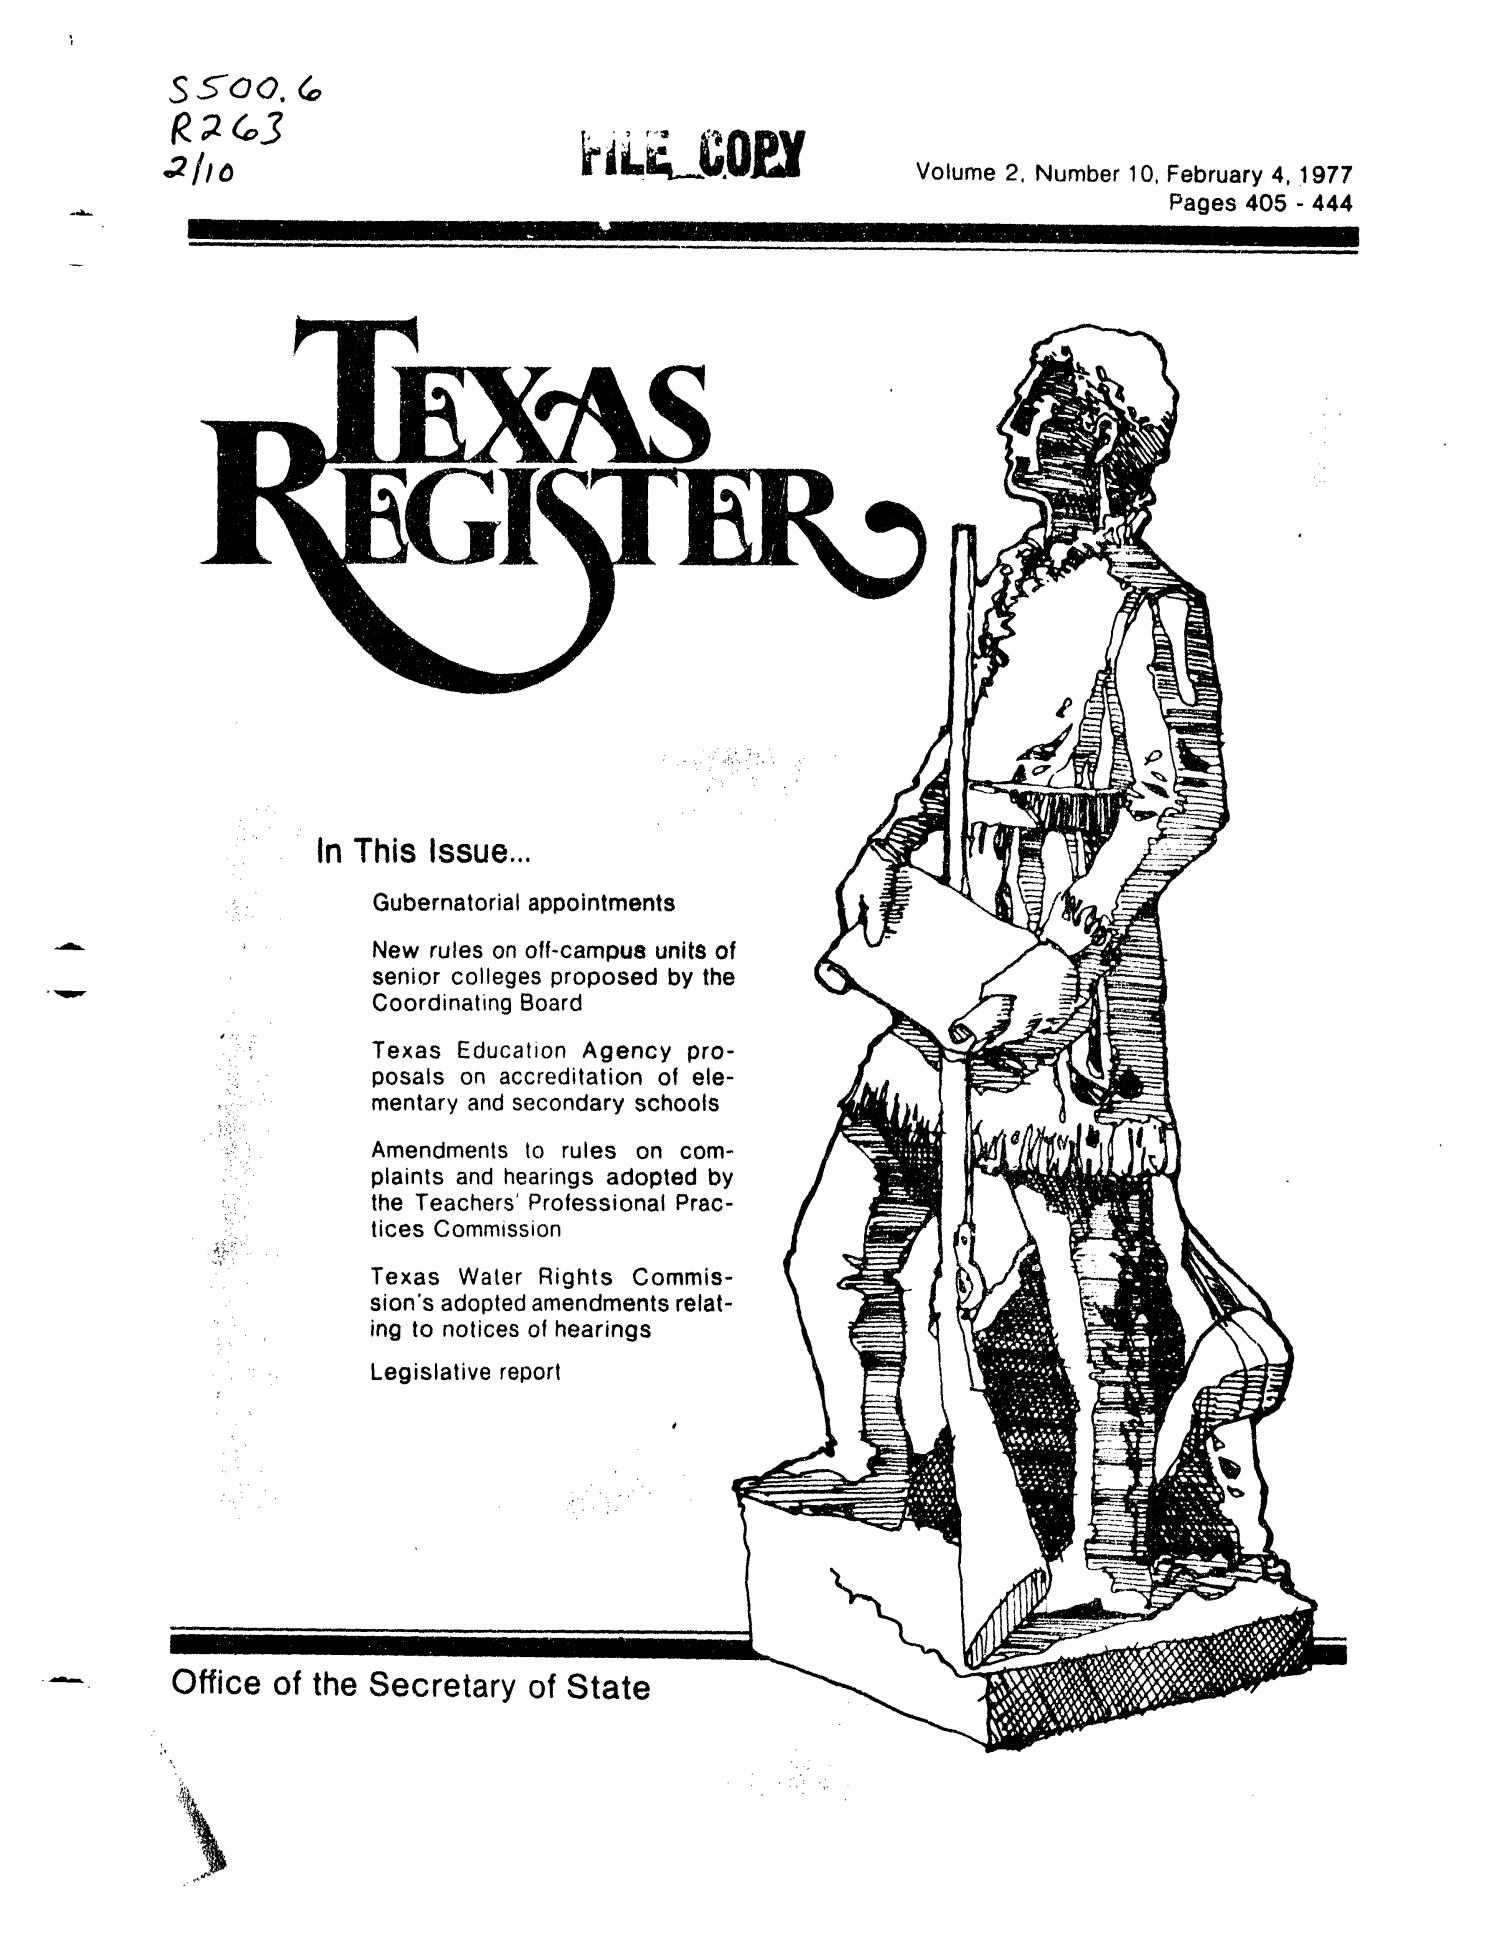 Texas Register, Volume 2, Number 10, Pages 405-444, February 4, 1977
                                                
                                                    Title Page
                                                